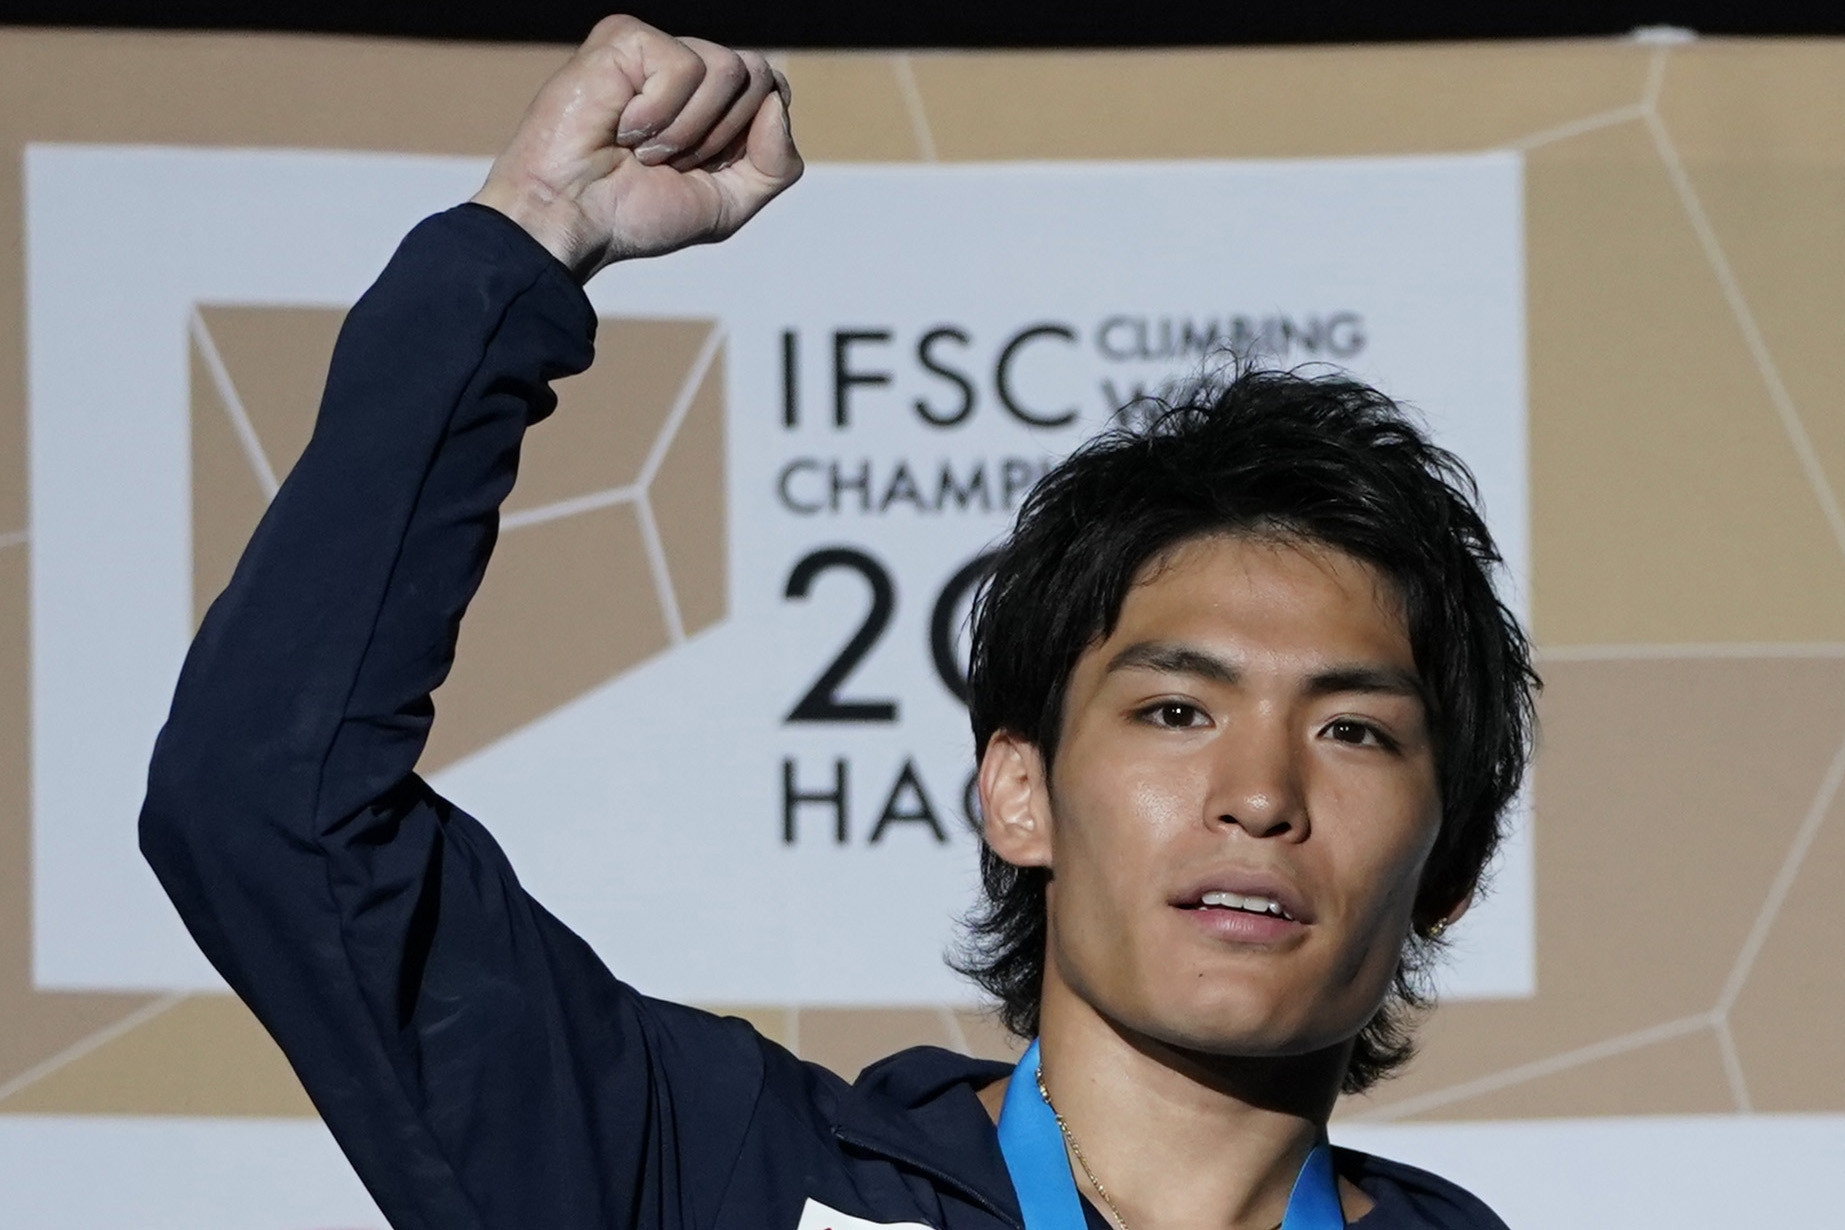 Tomoa Narasaki's win positions him as a favourite for home gold at Tokyo 2020 ©Getty Images